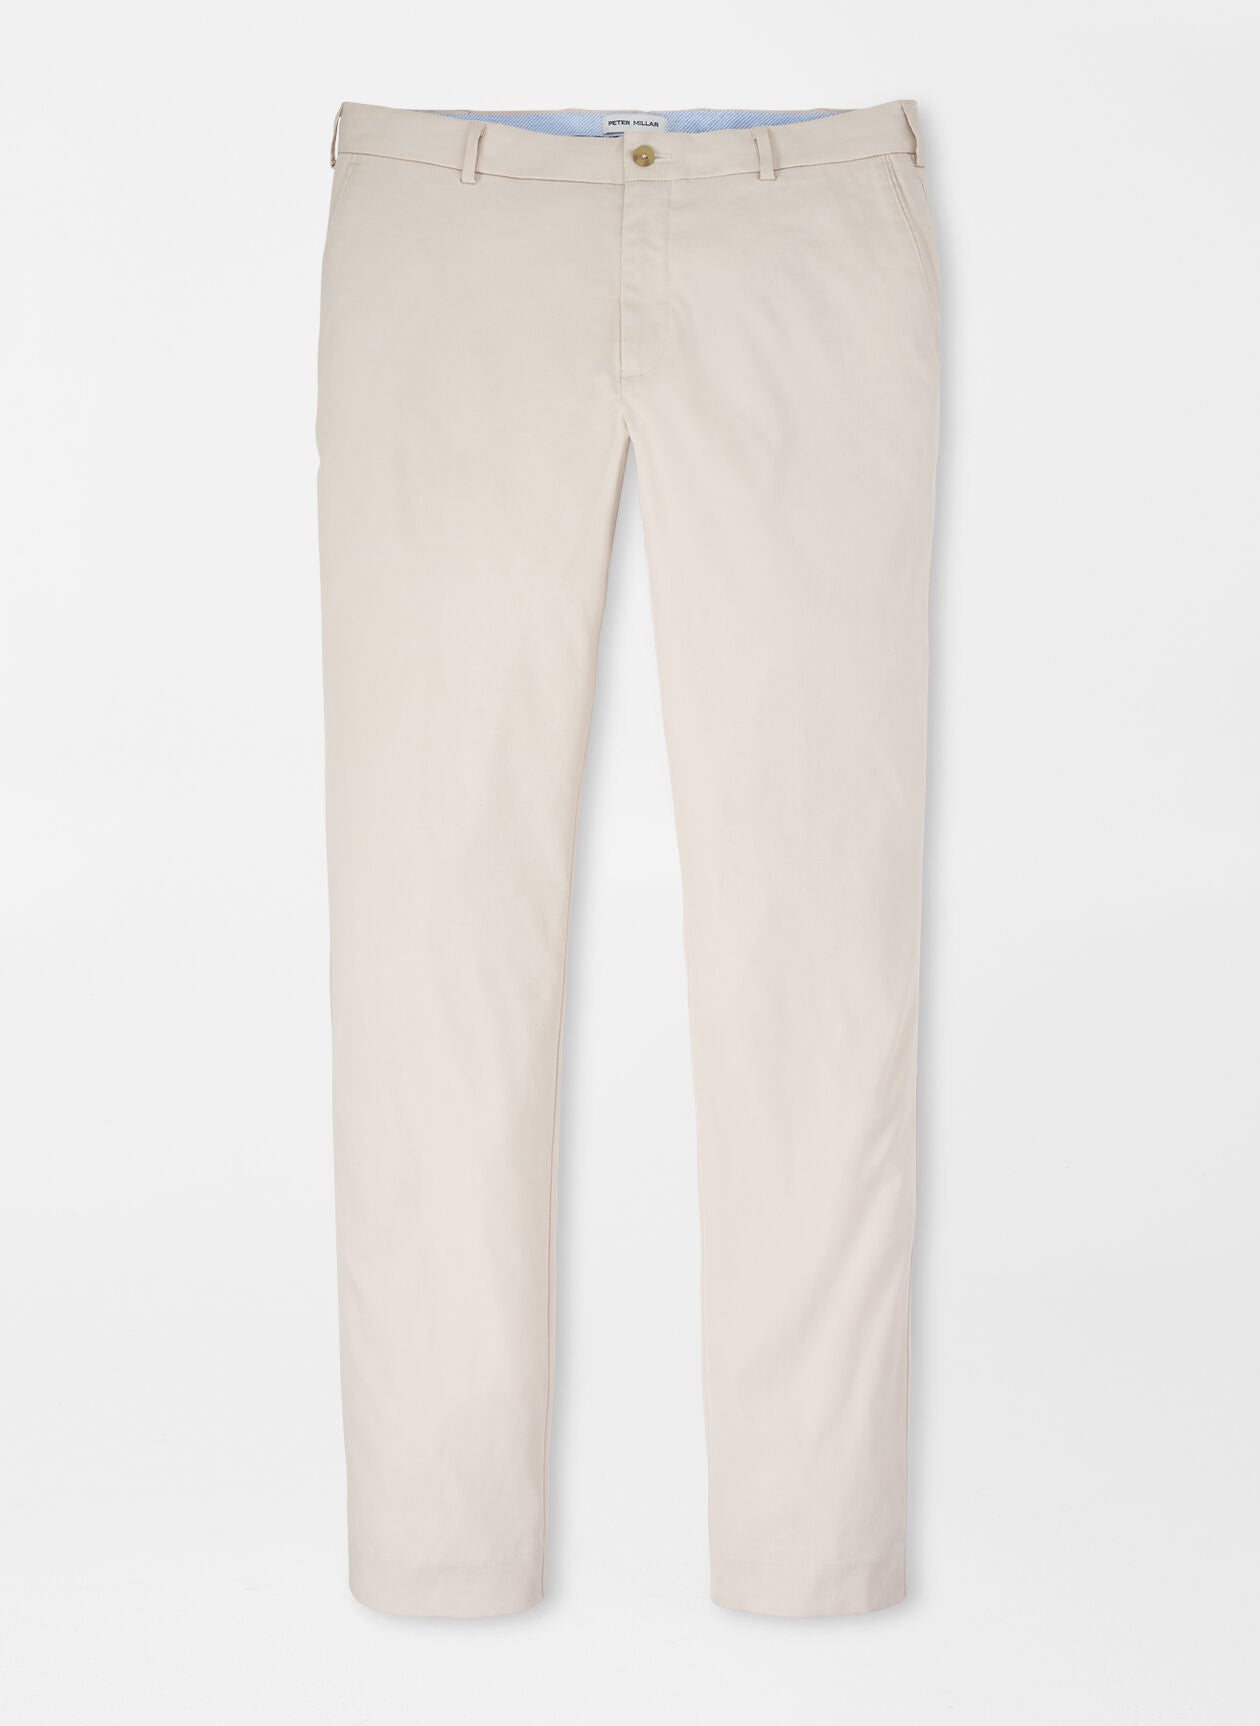 RALEIGH PERFORMANCE TROUSER - STONE